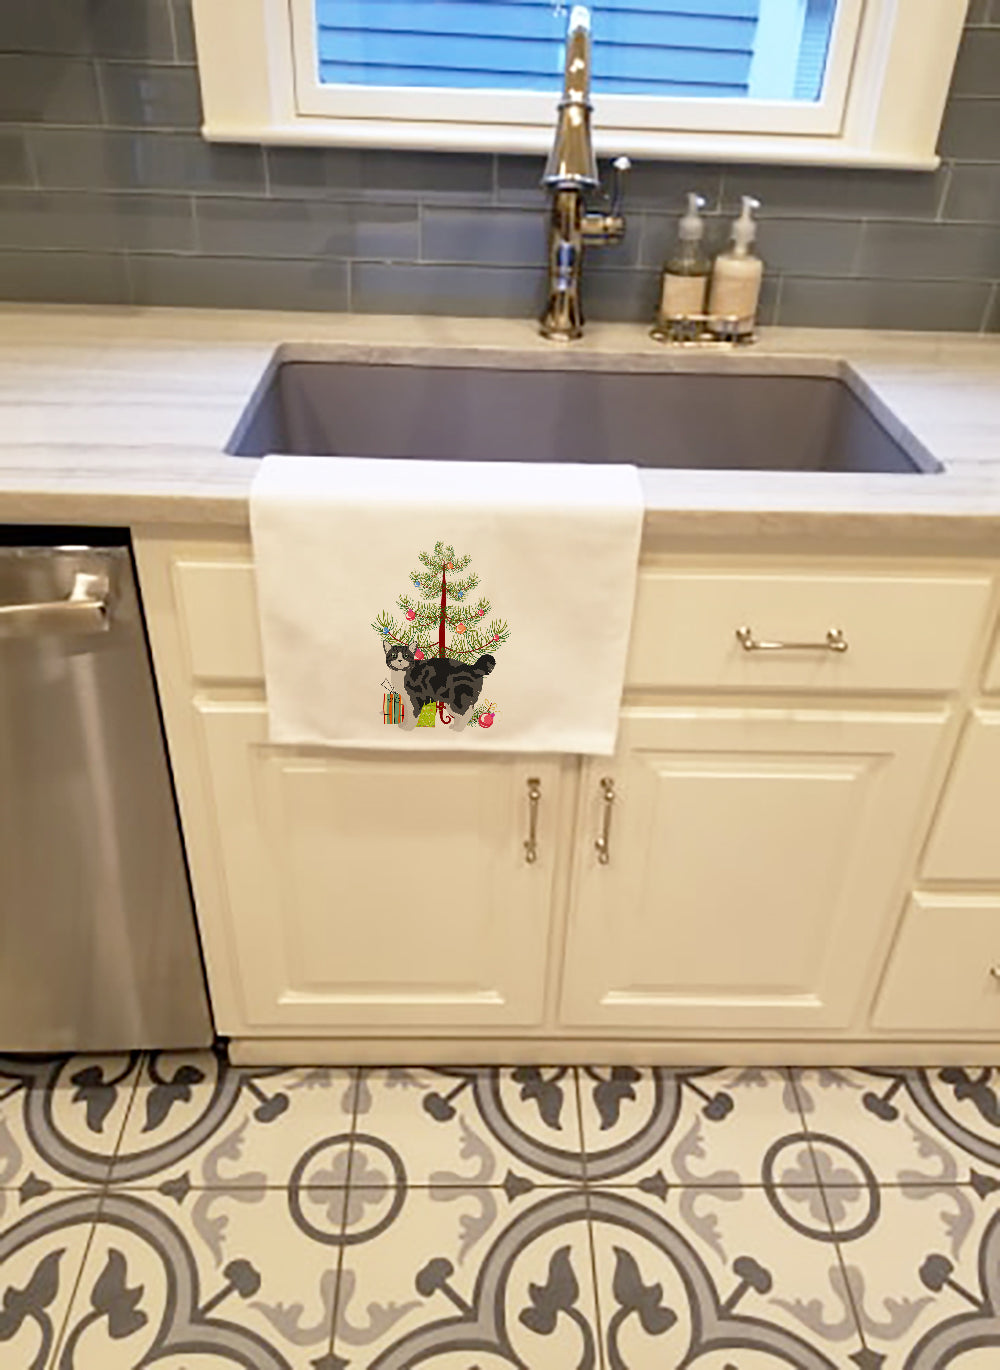 Buy this Manx #1 Cat Merry Christmas White Kitchen Towel Set of 2